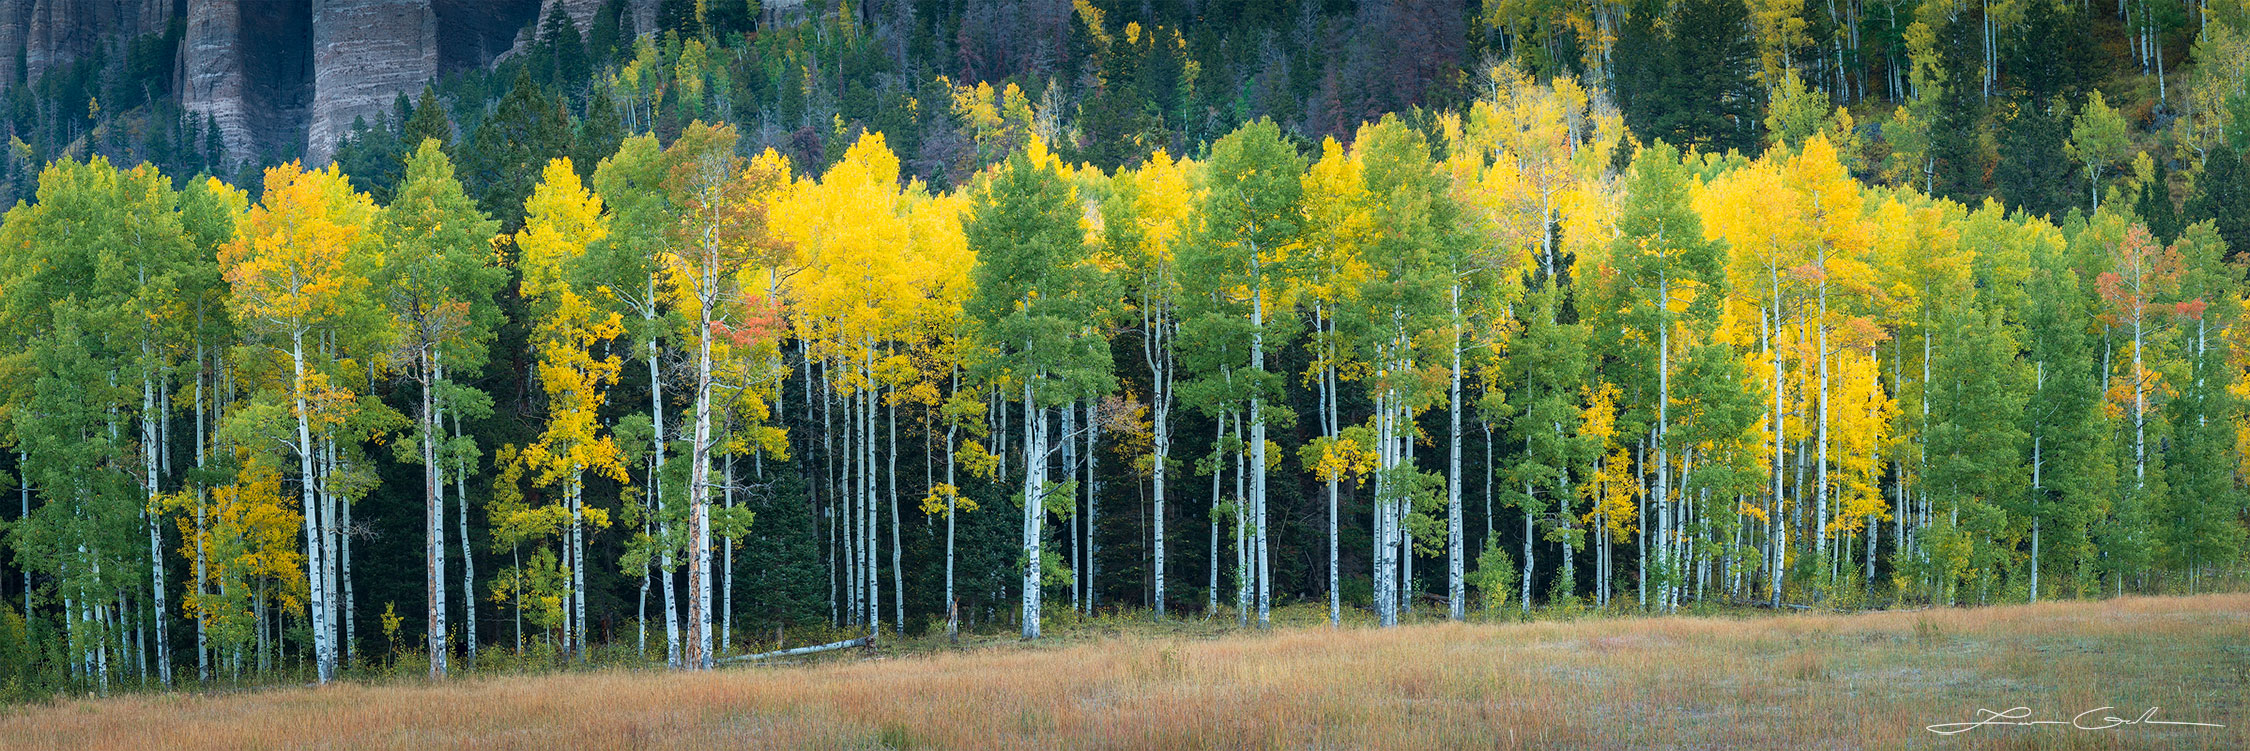 Gold aspen trees among green aspens and spruce trees - Gintchin Fine Art